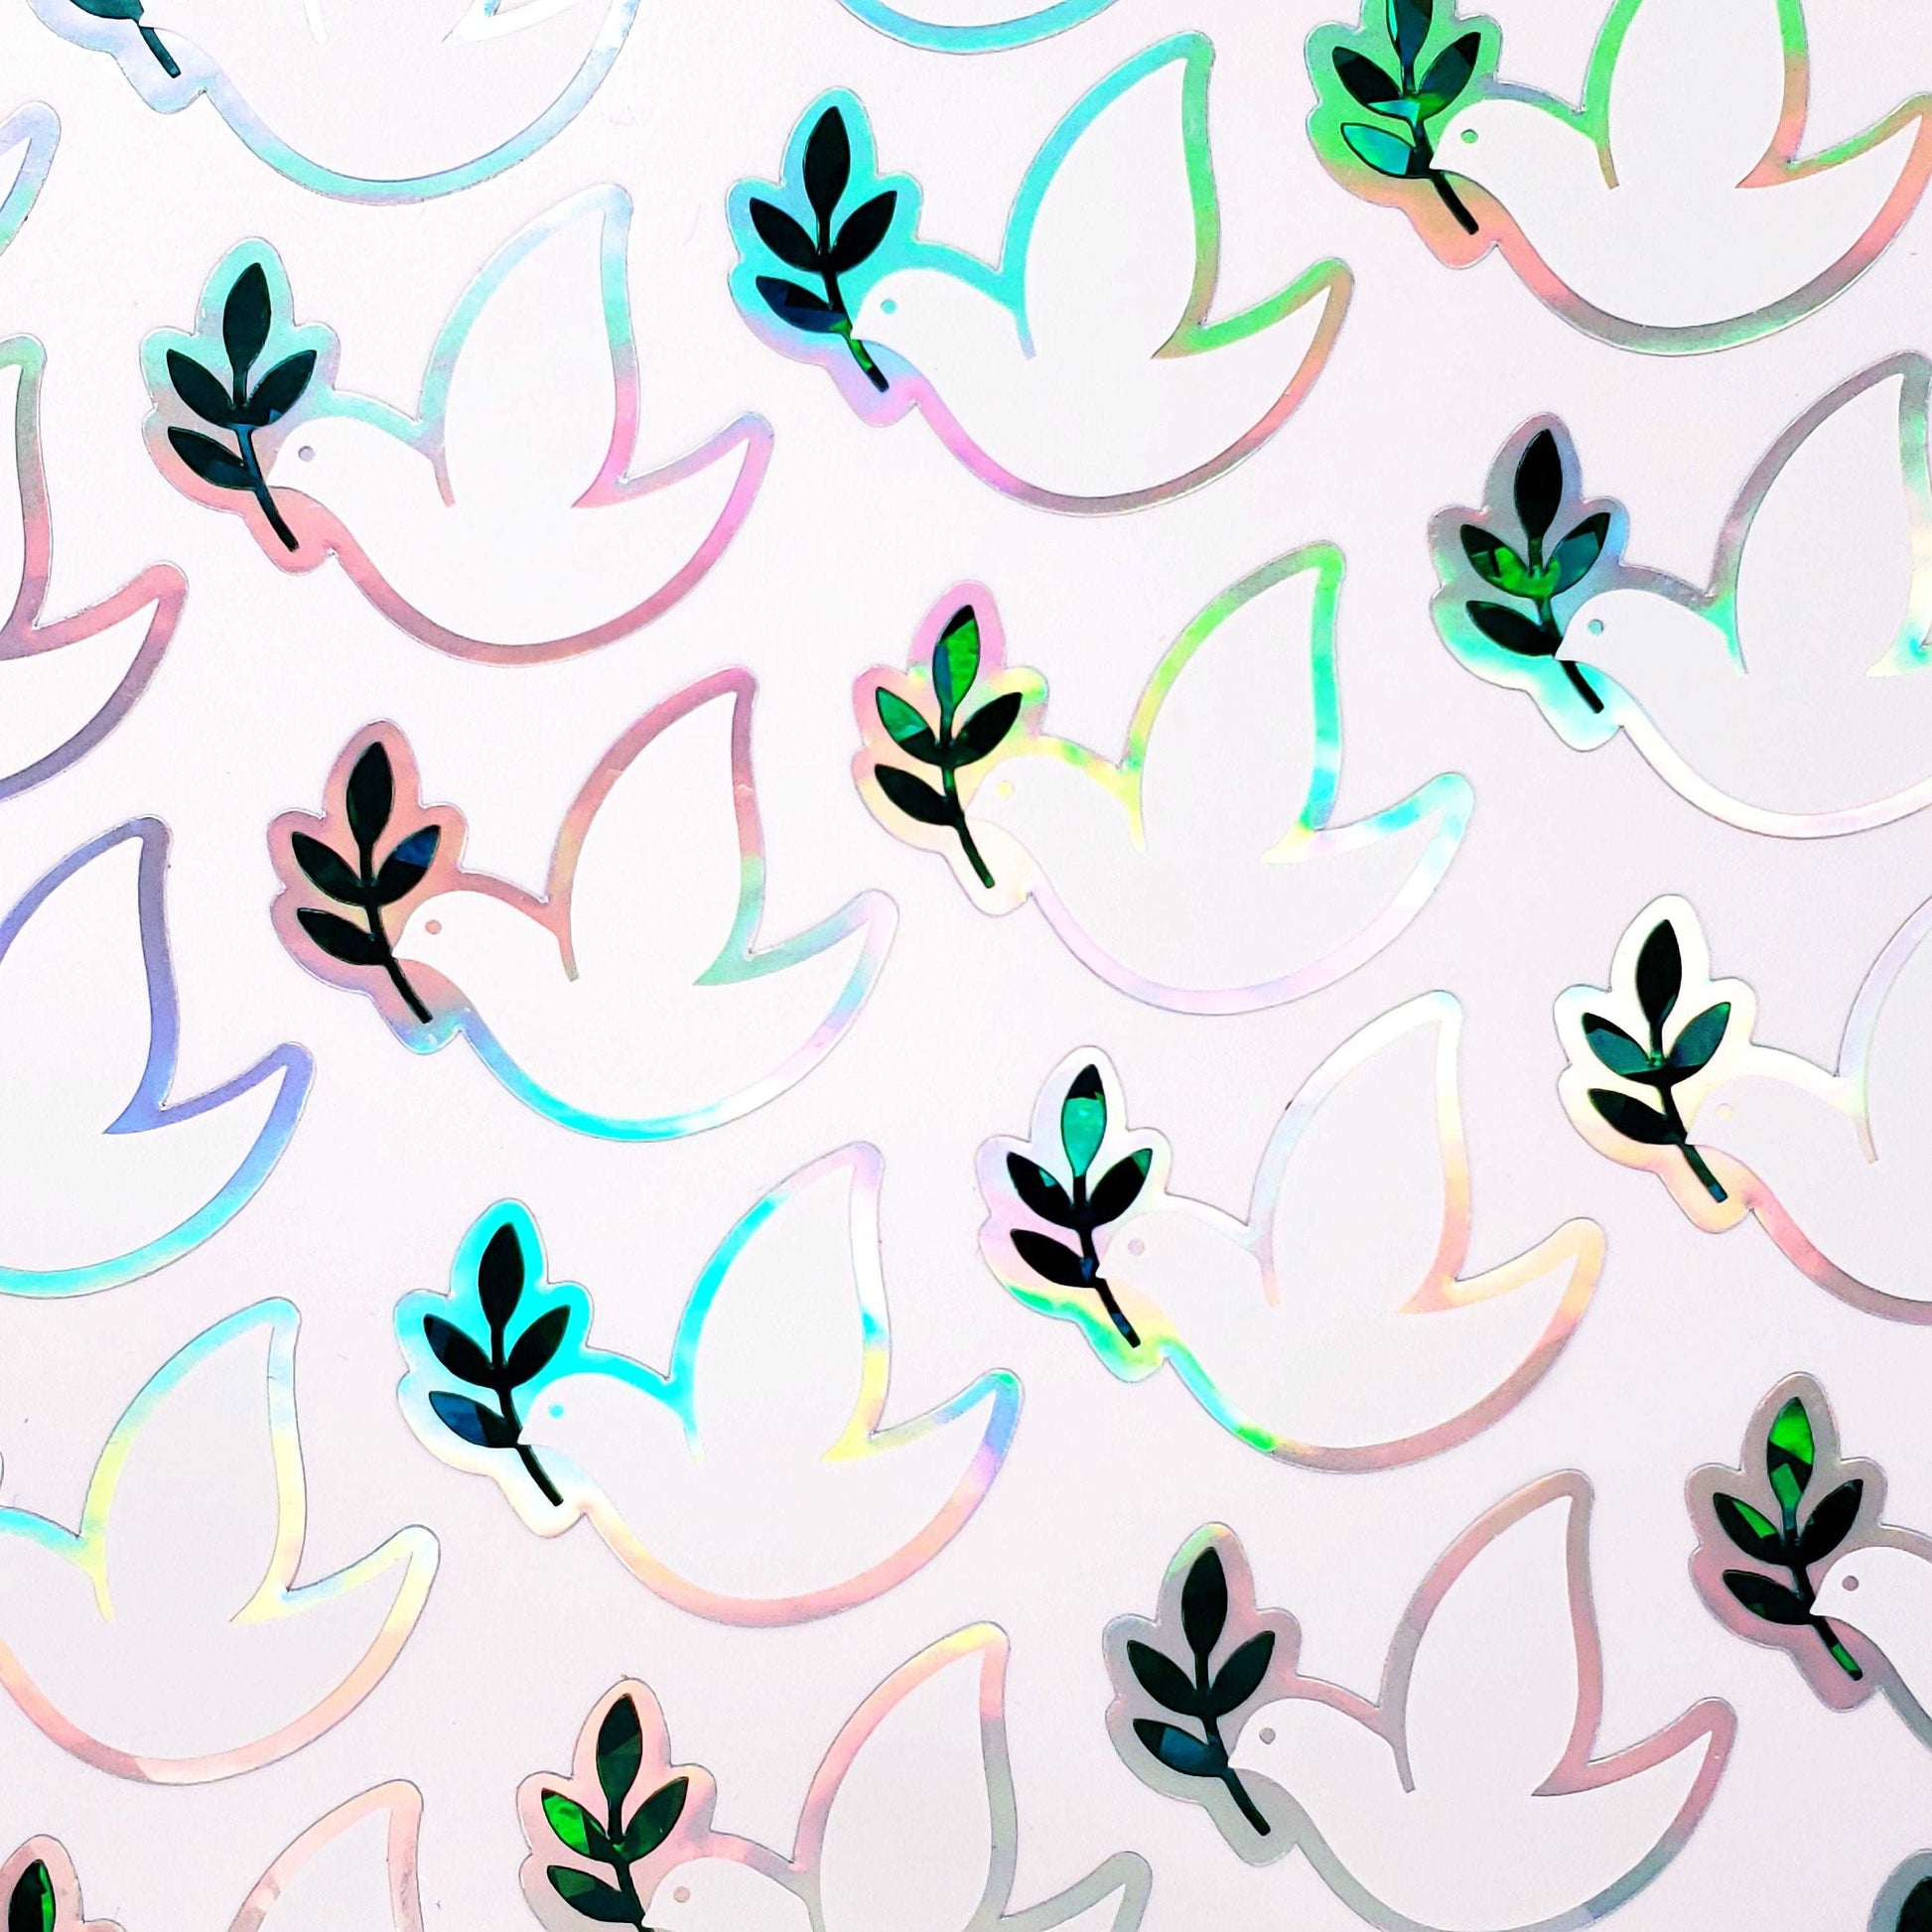 Peace Dove Stickers, set of 28 white and silver stickers for invitations, envelopes, memorial cards, planners, journals and crafts.